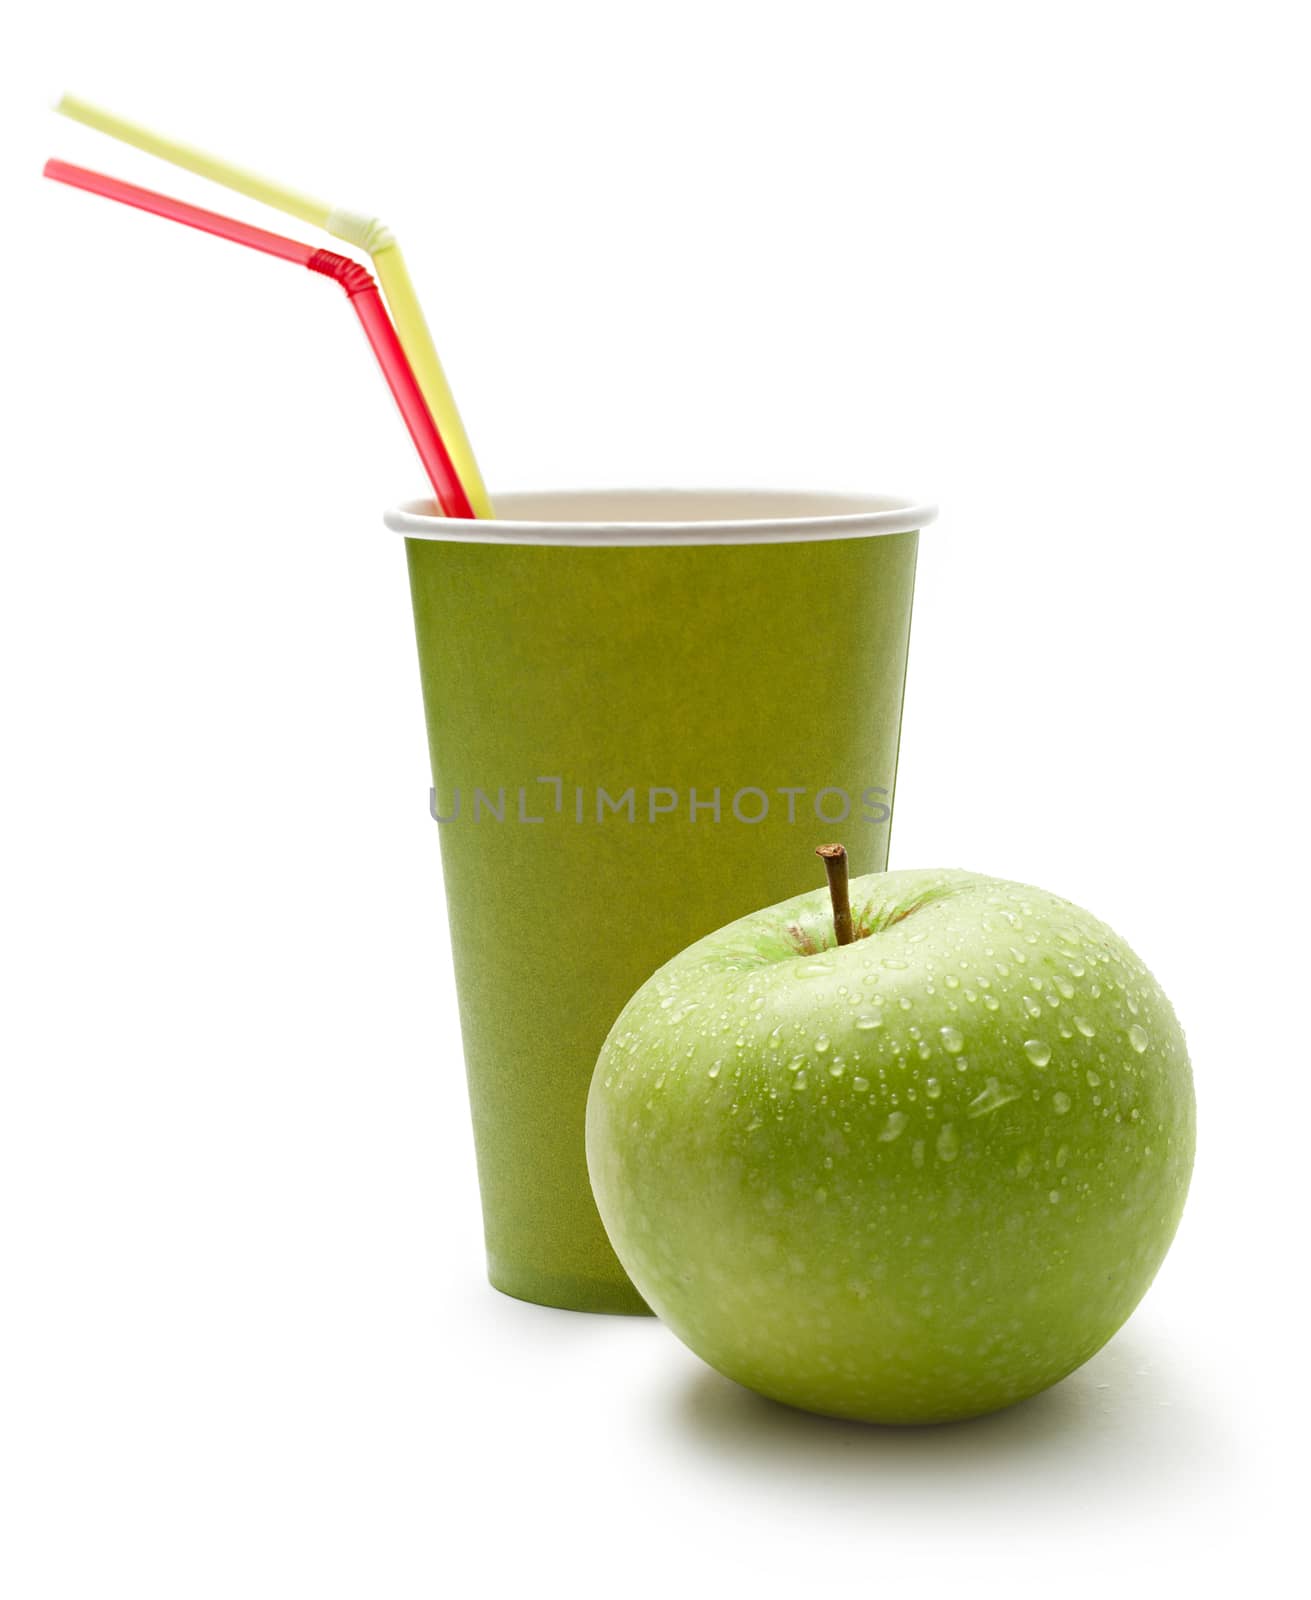 Paper cup with straws and green apple